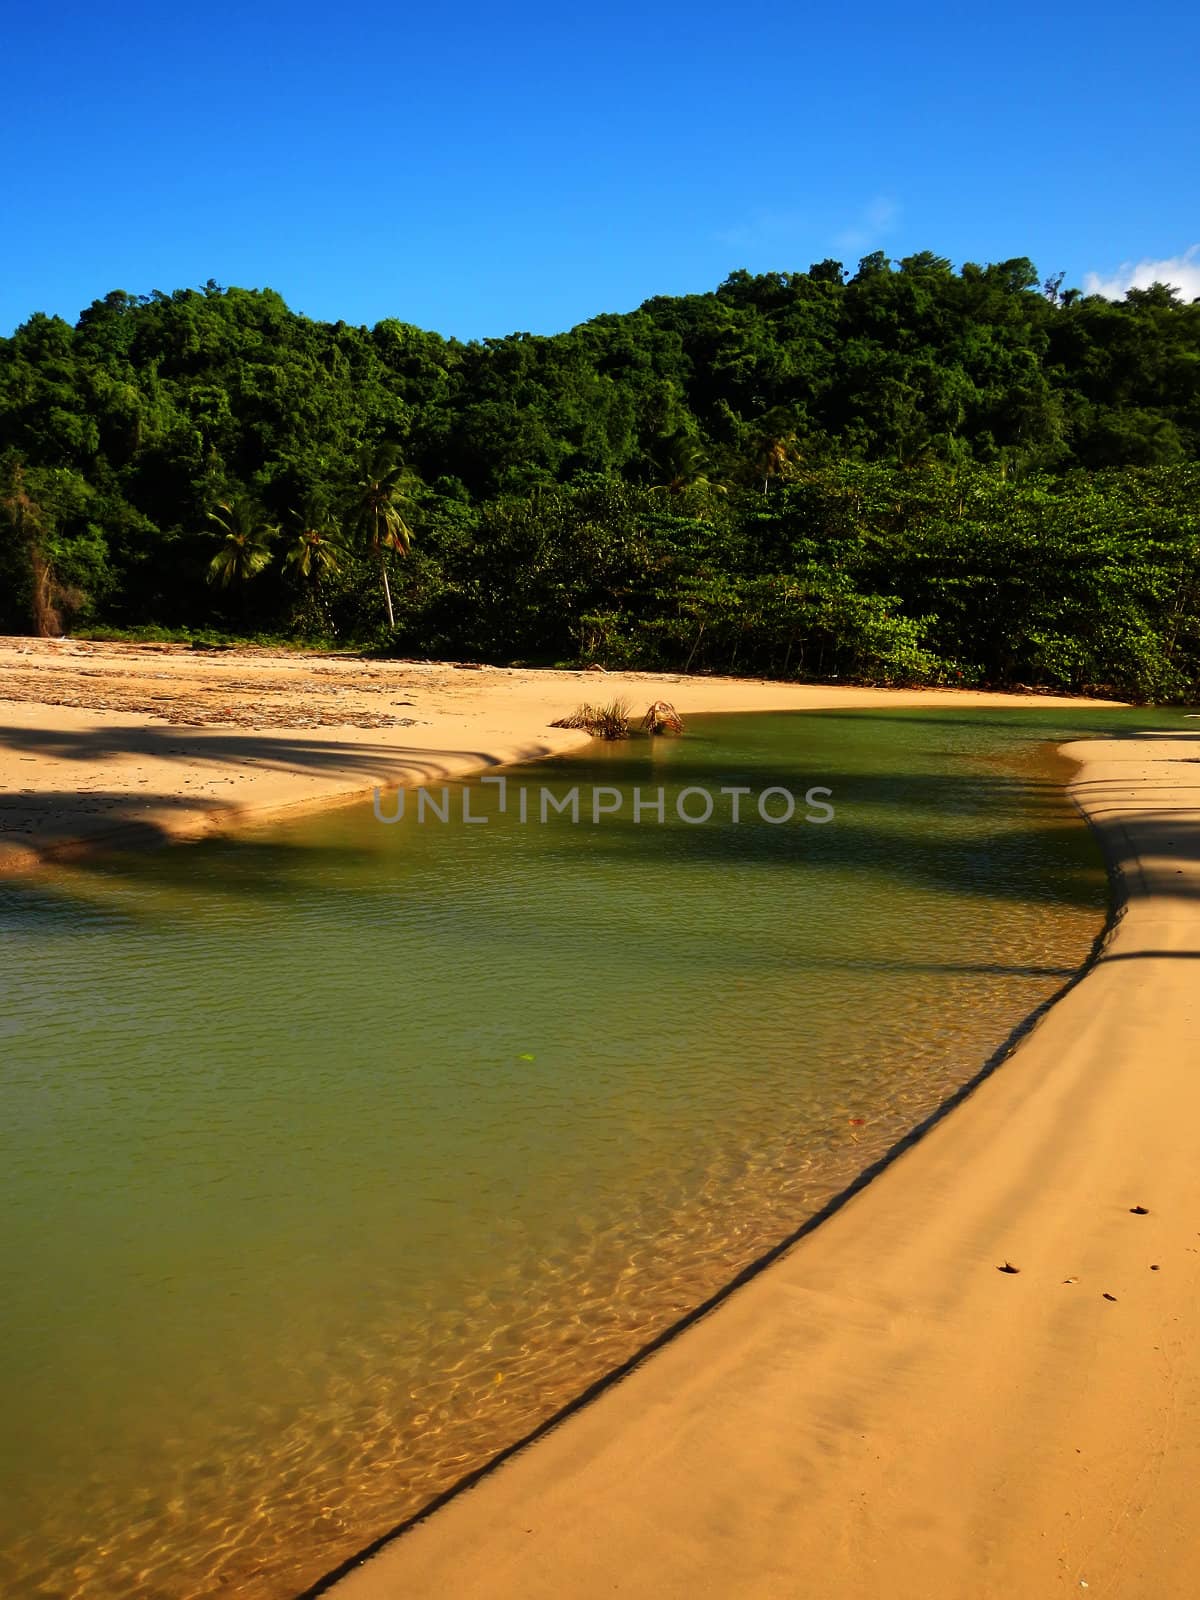 Freshwater river on a beach, Playa El Limon, Dominican Republic by donya_nedomam